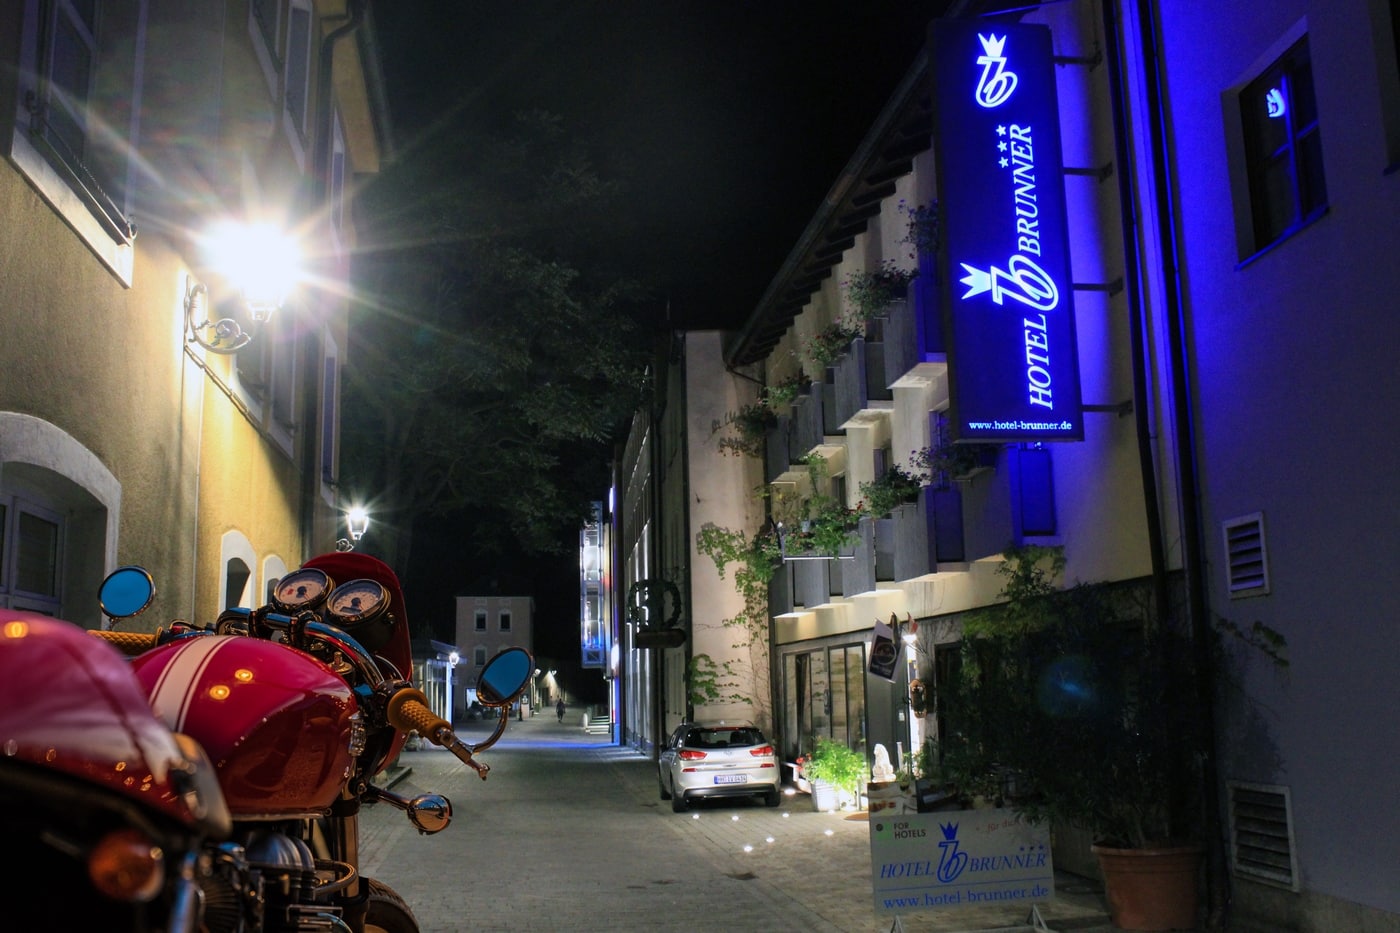 Motorcyclists enjoy numerous advantages at Hotel Brunner.